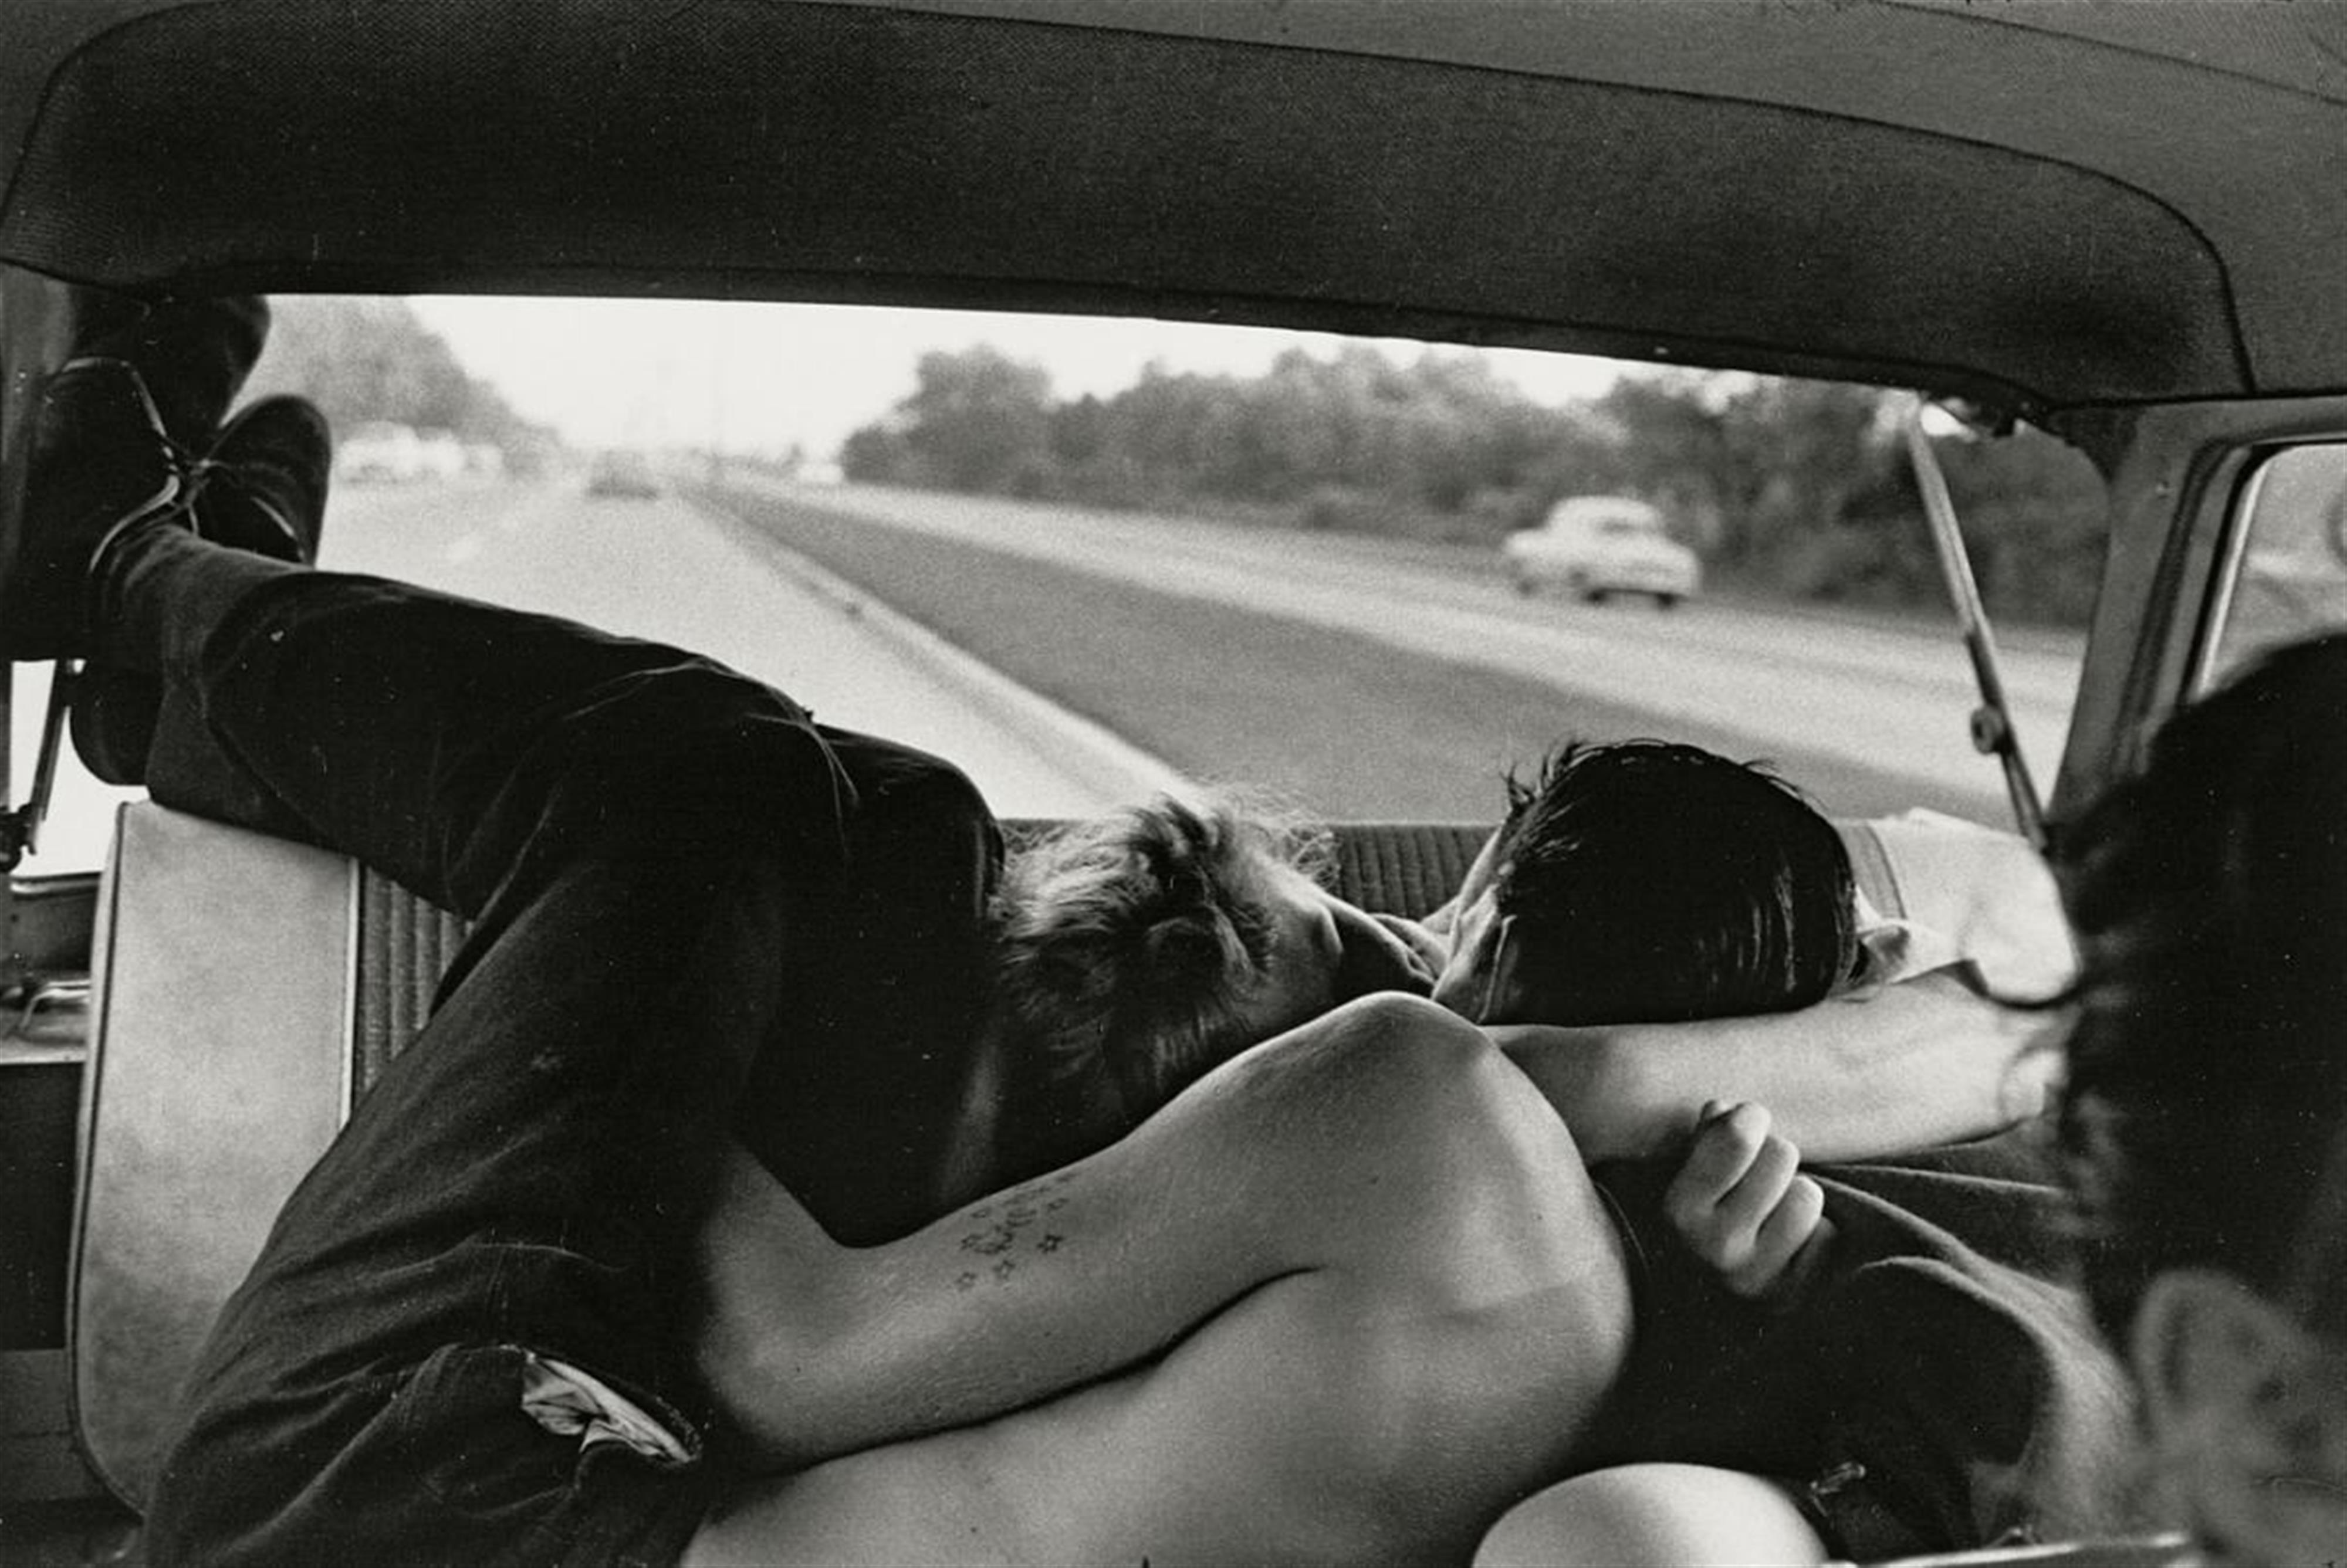 Bruce Davidson - Untitled (from the series: Brooklyn Gang) - image-1